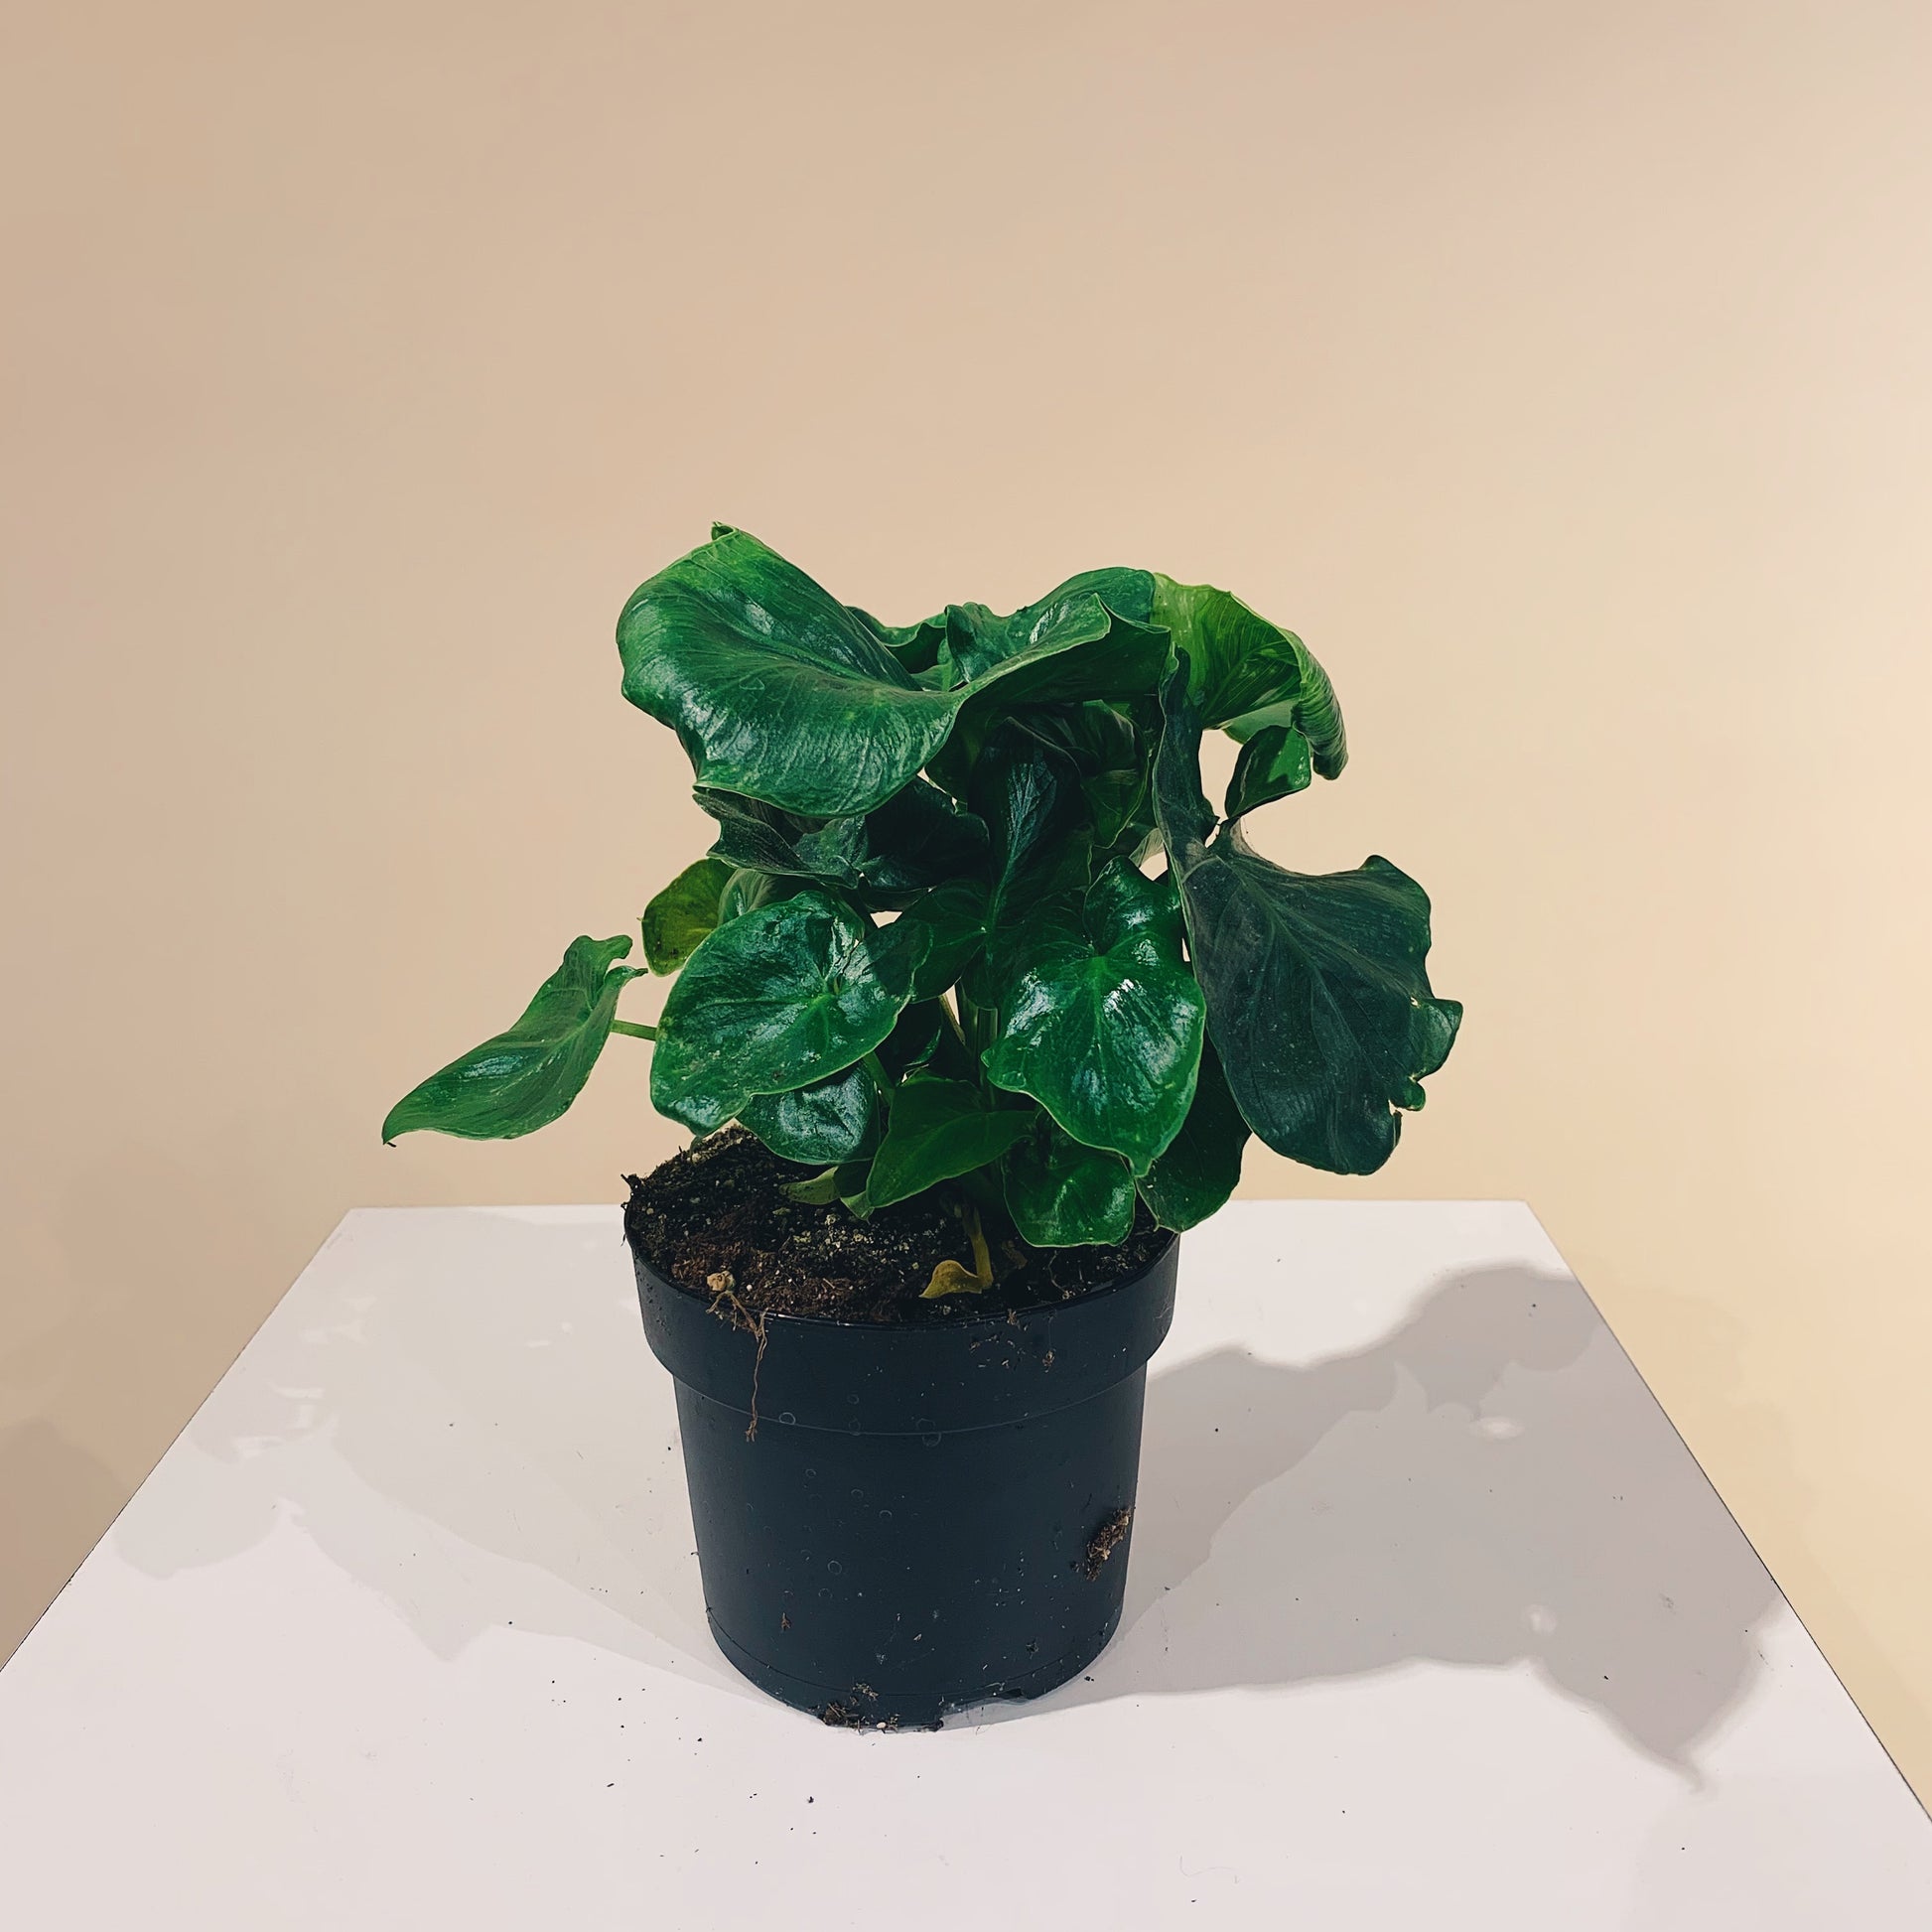 Atom Philo (Philodendron) in a 5 inch pot. Indoor plant for sale by Promise Supply for delivery and pickup in Toronto